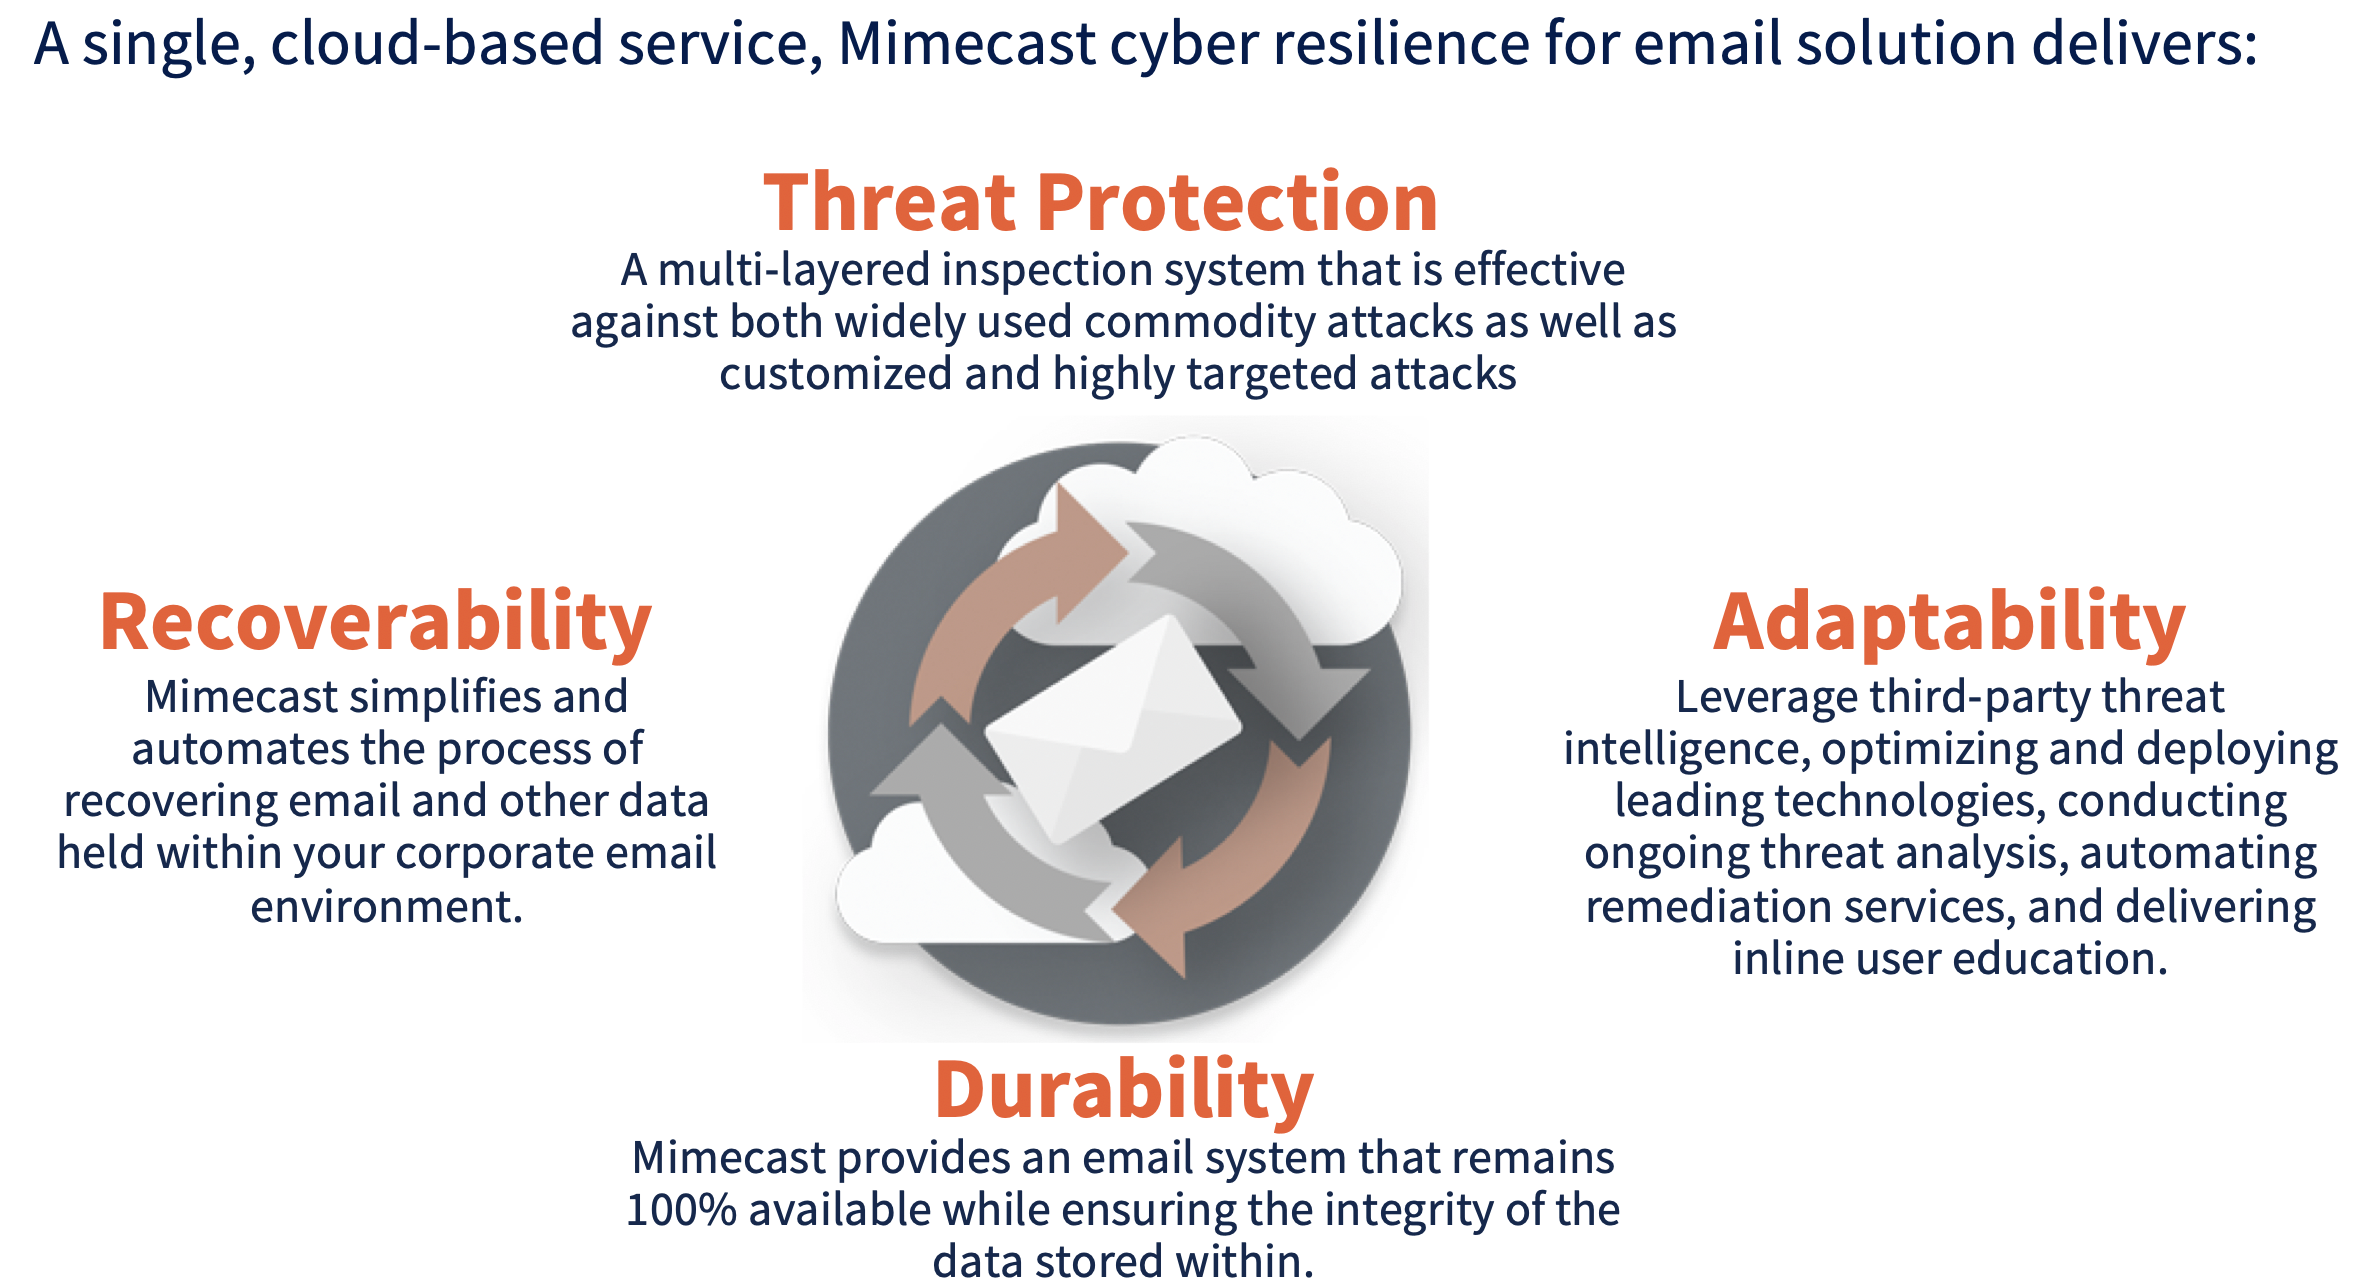 Mimecast cyber resilience